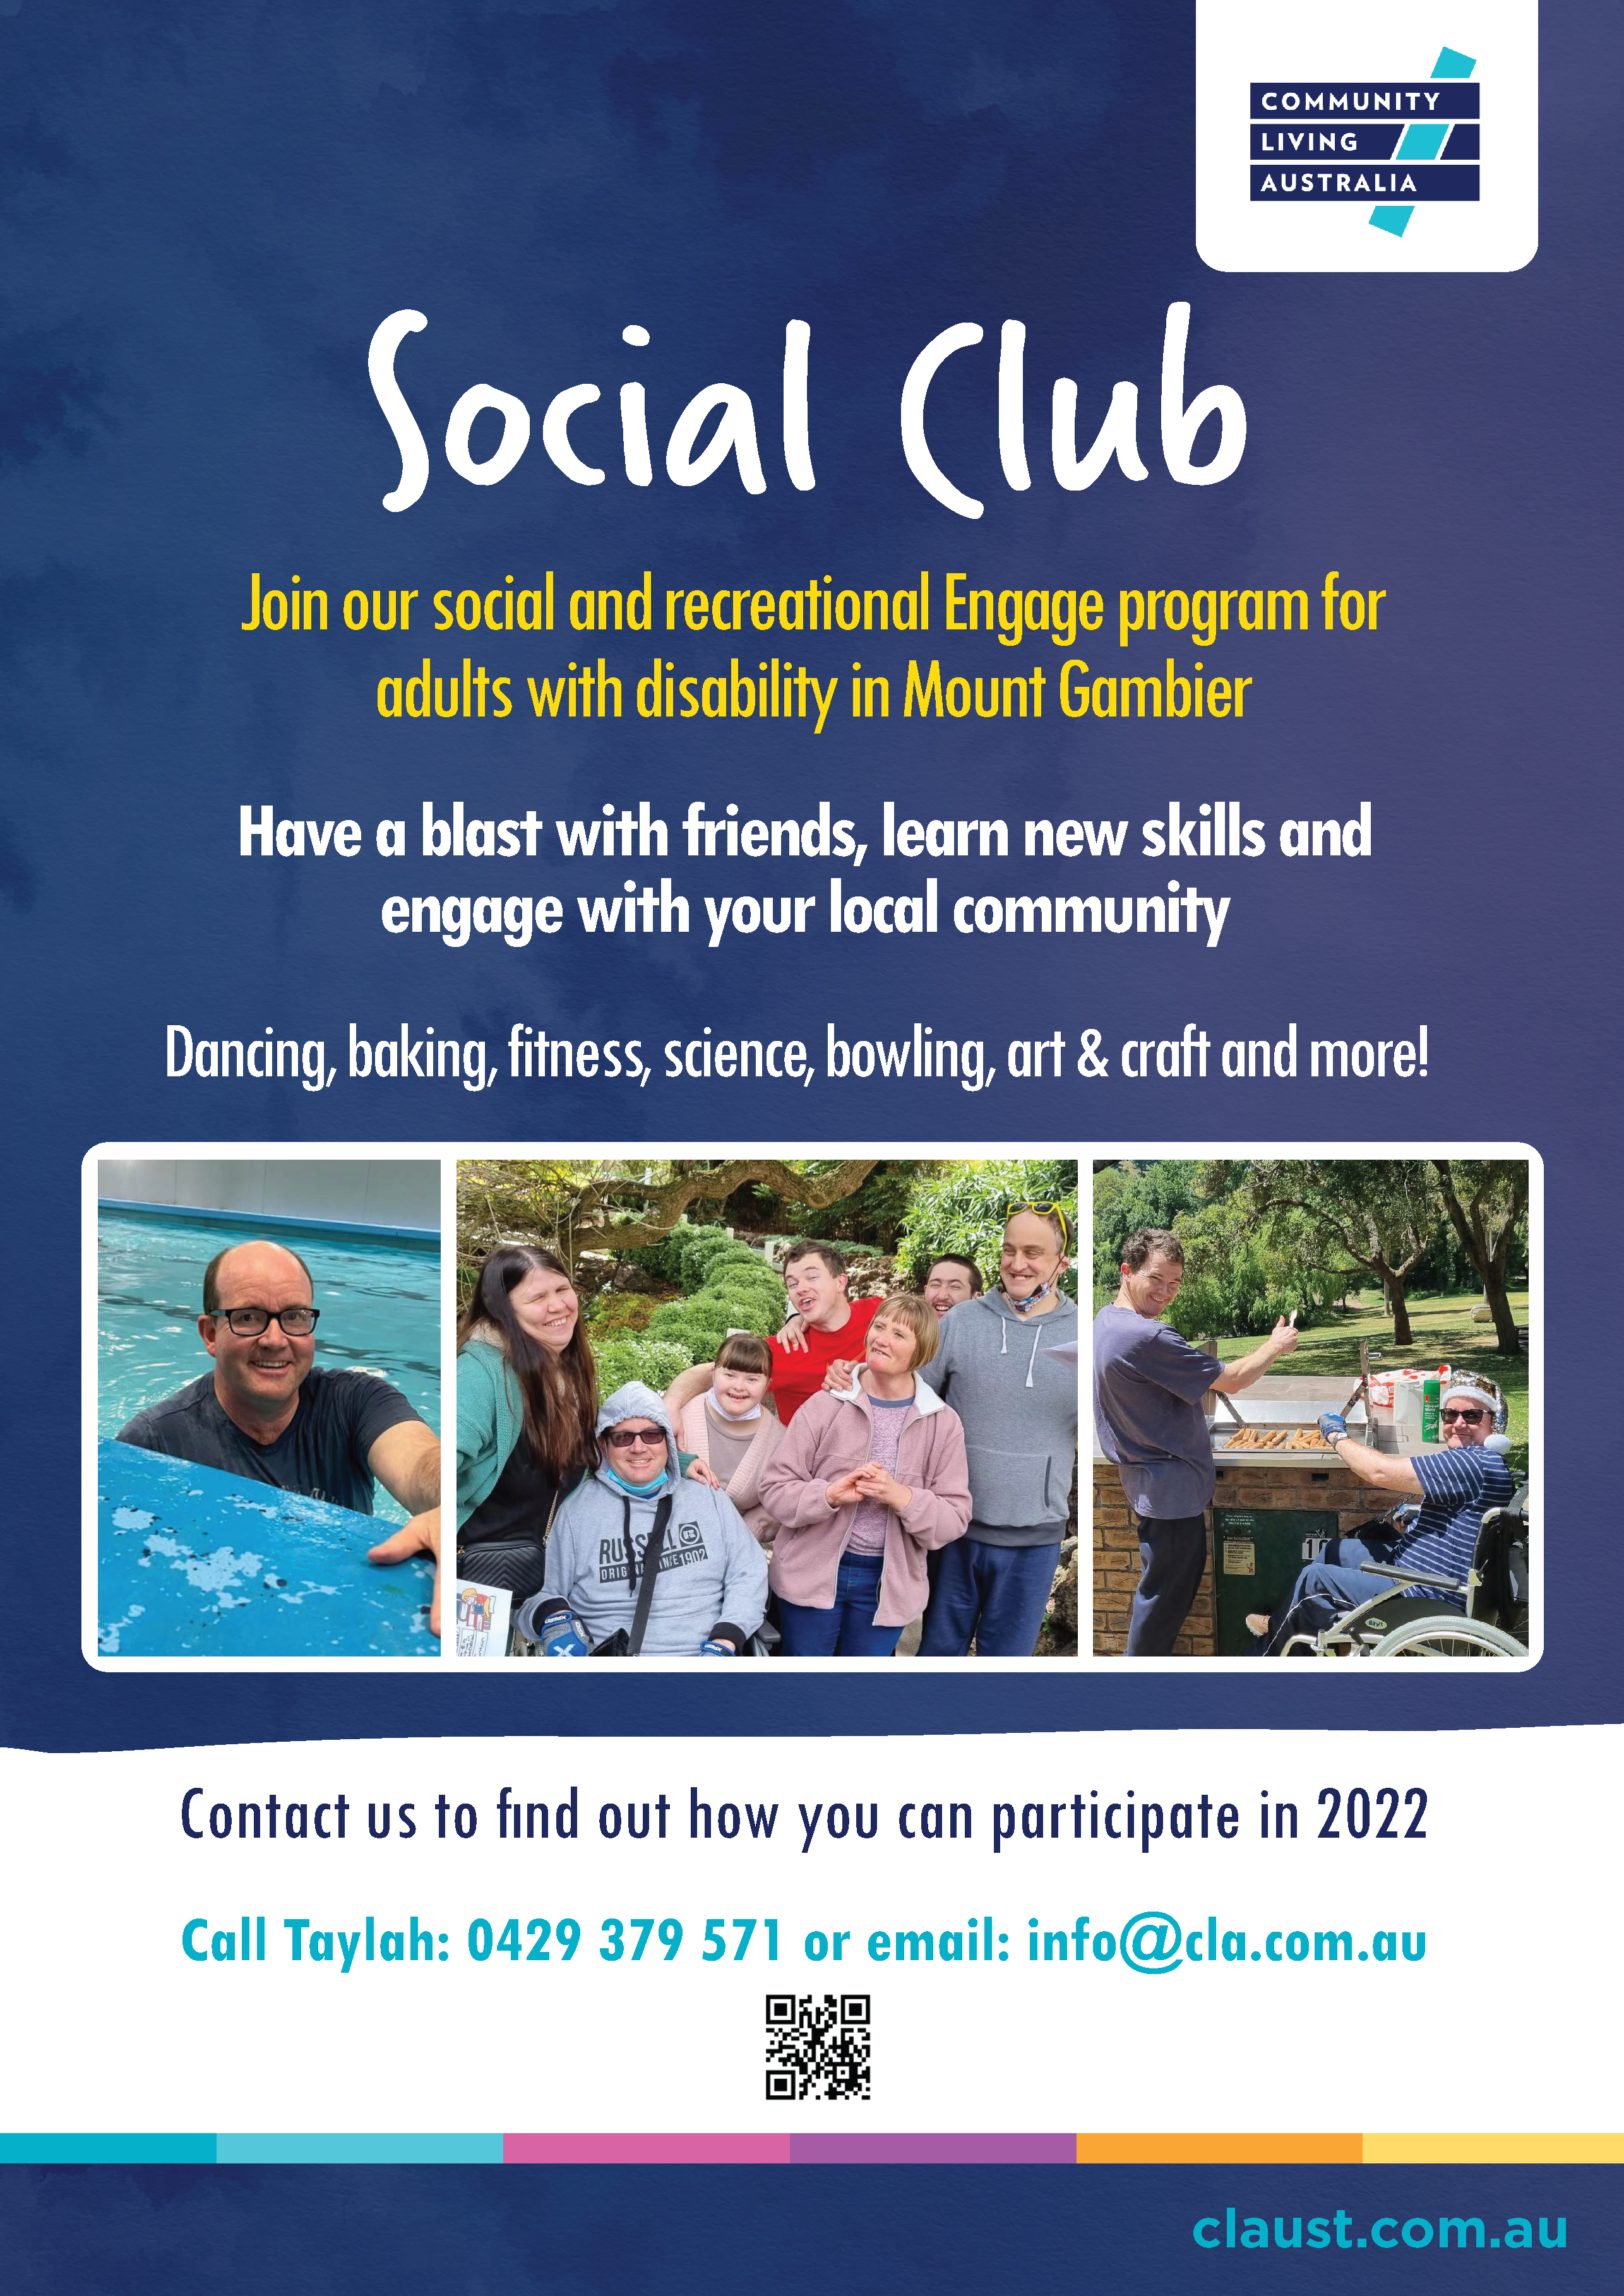 Social Club flyer. All information on the flyer is mentioned on this event page.